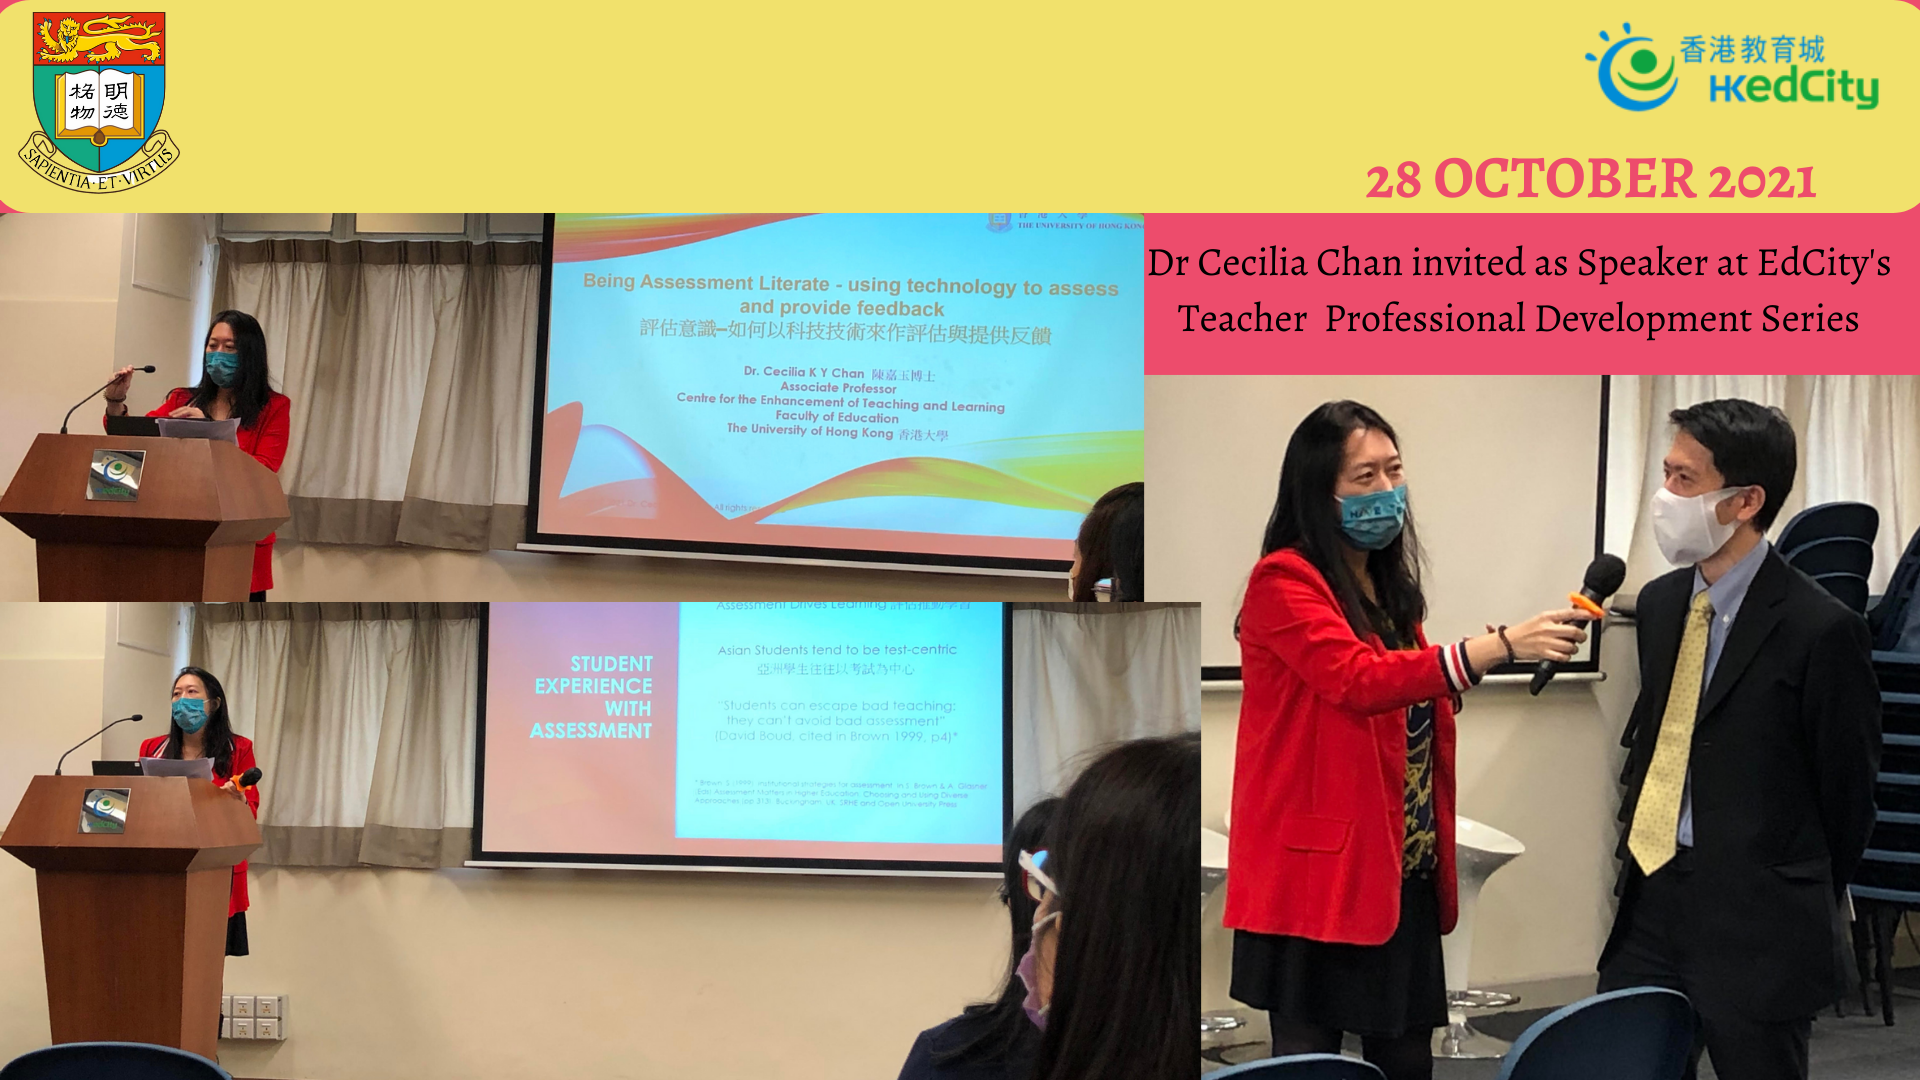 Dr. Cecilia Chan was invited as Honourable Speaker at the Teacher Professional Development Series 2021